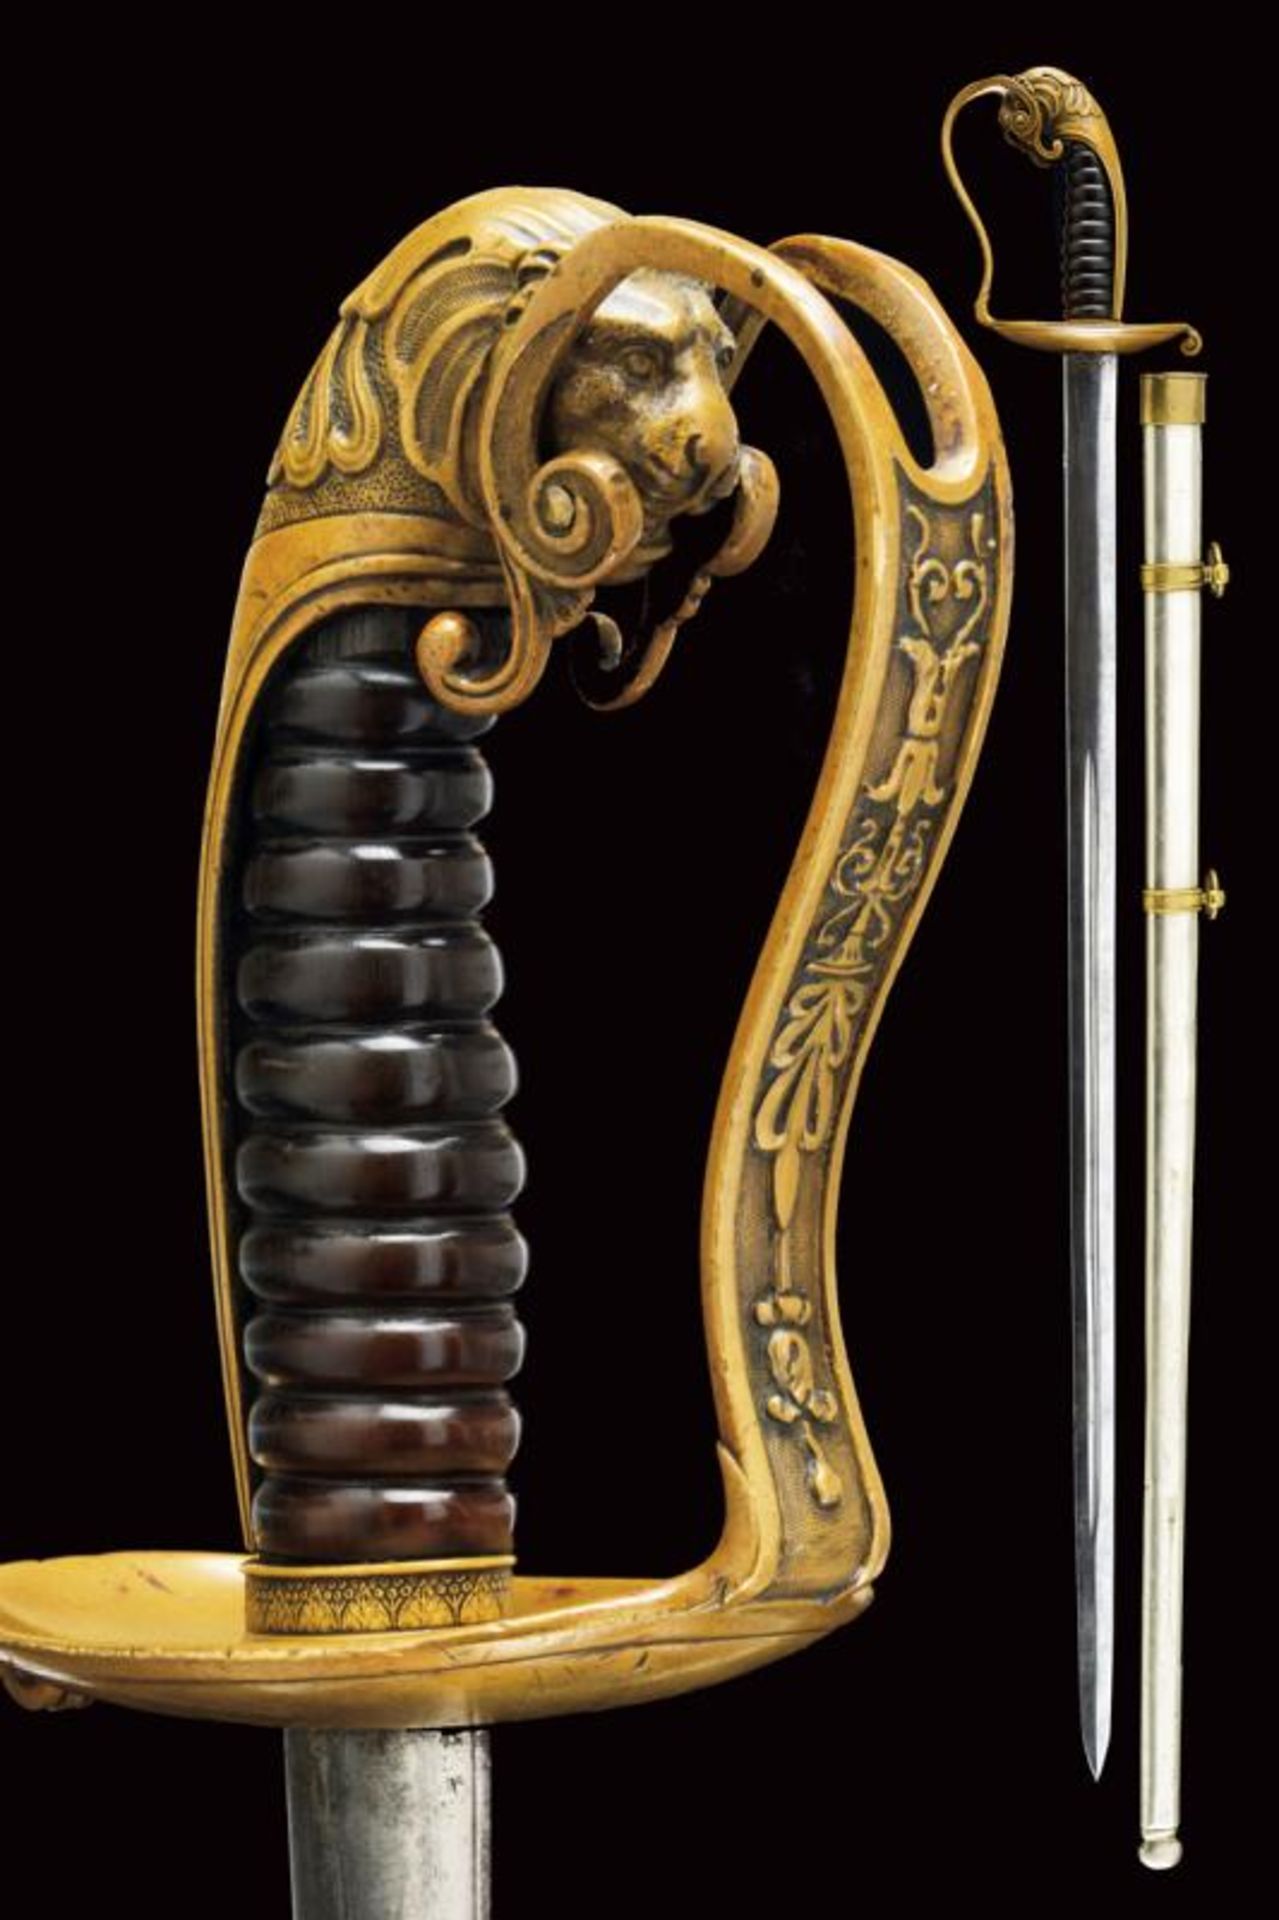 A Guardia Civica officer's sabre, model 1847